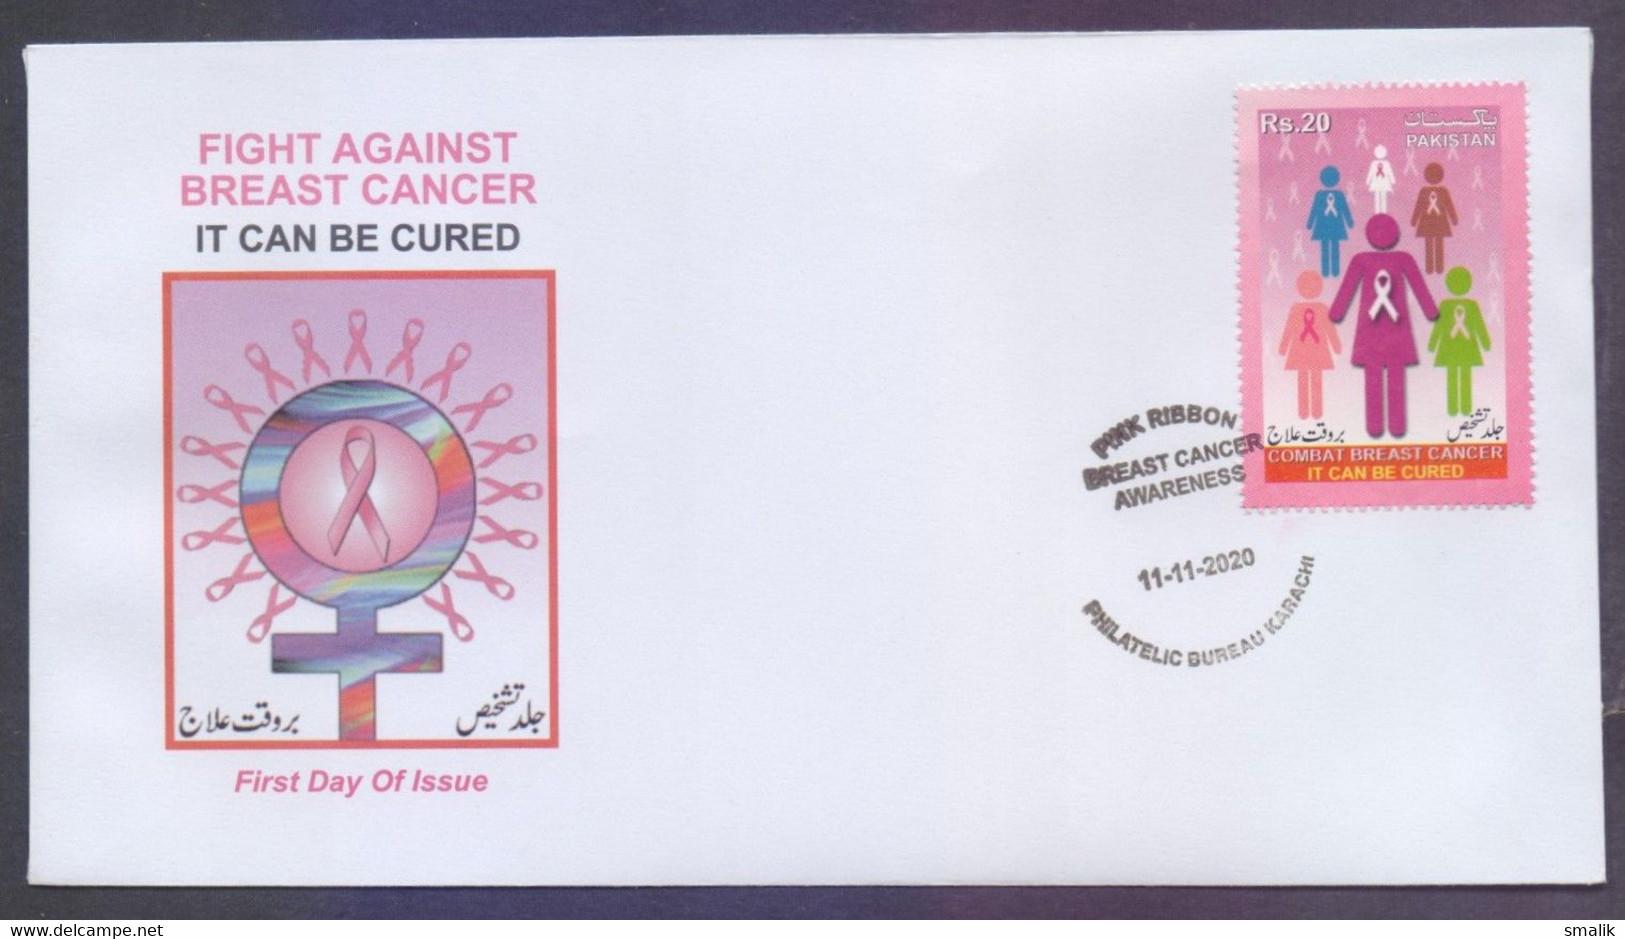 PAKISTAN 2020 FDC - Combat Breast CANCER It Can Be Cured, Disease Health, First Day Cover - Pakistan